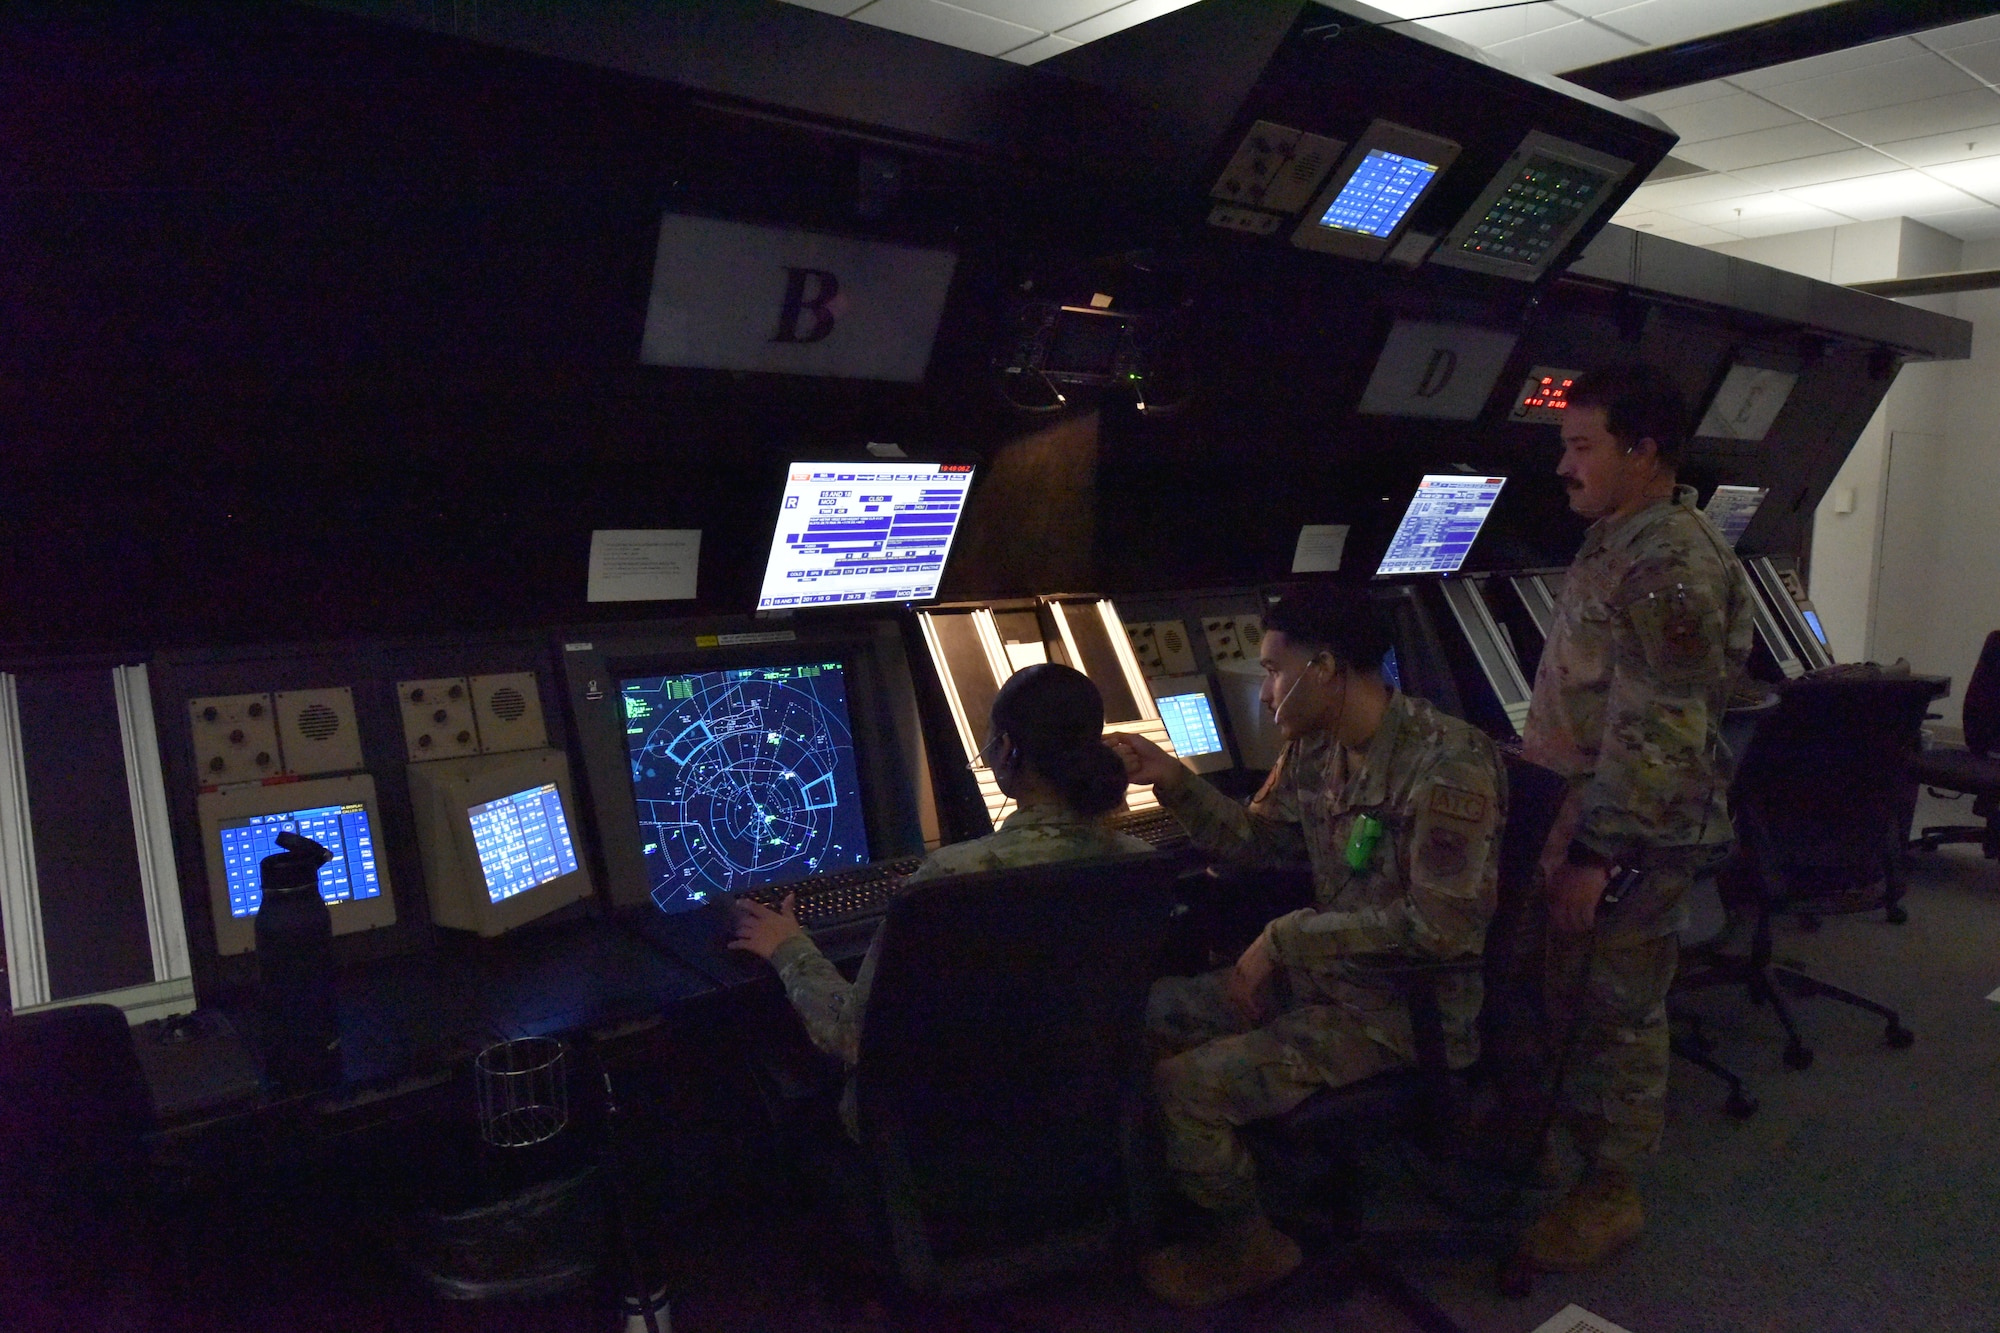 Three Airmen are looking at a radar screen showing the position of aircraft.